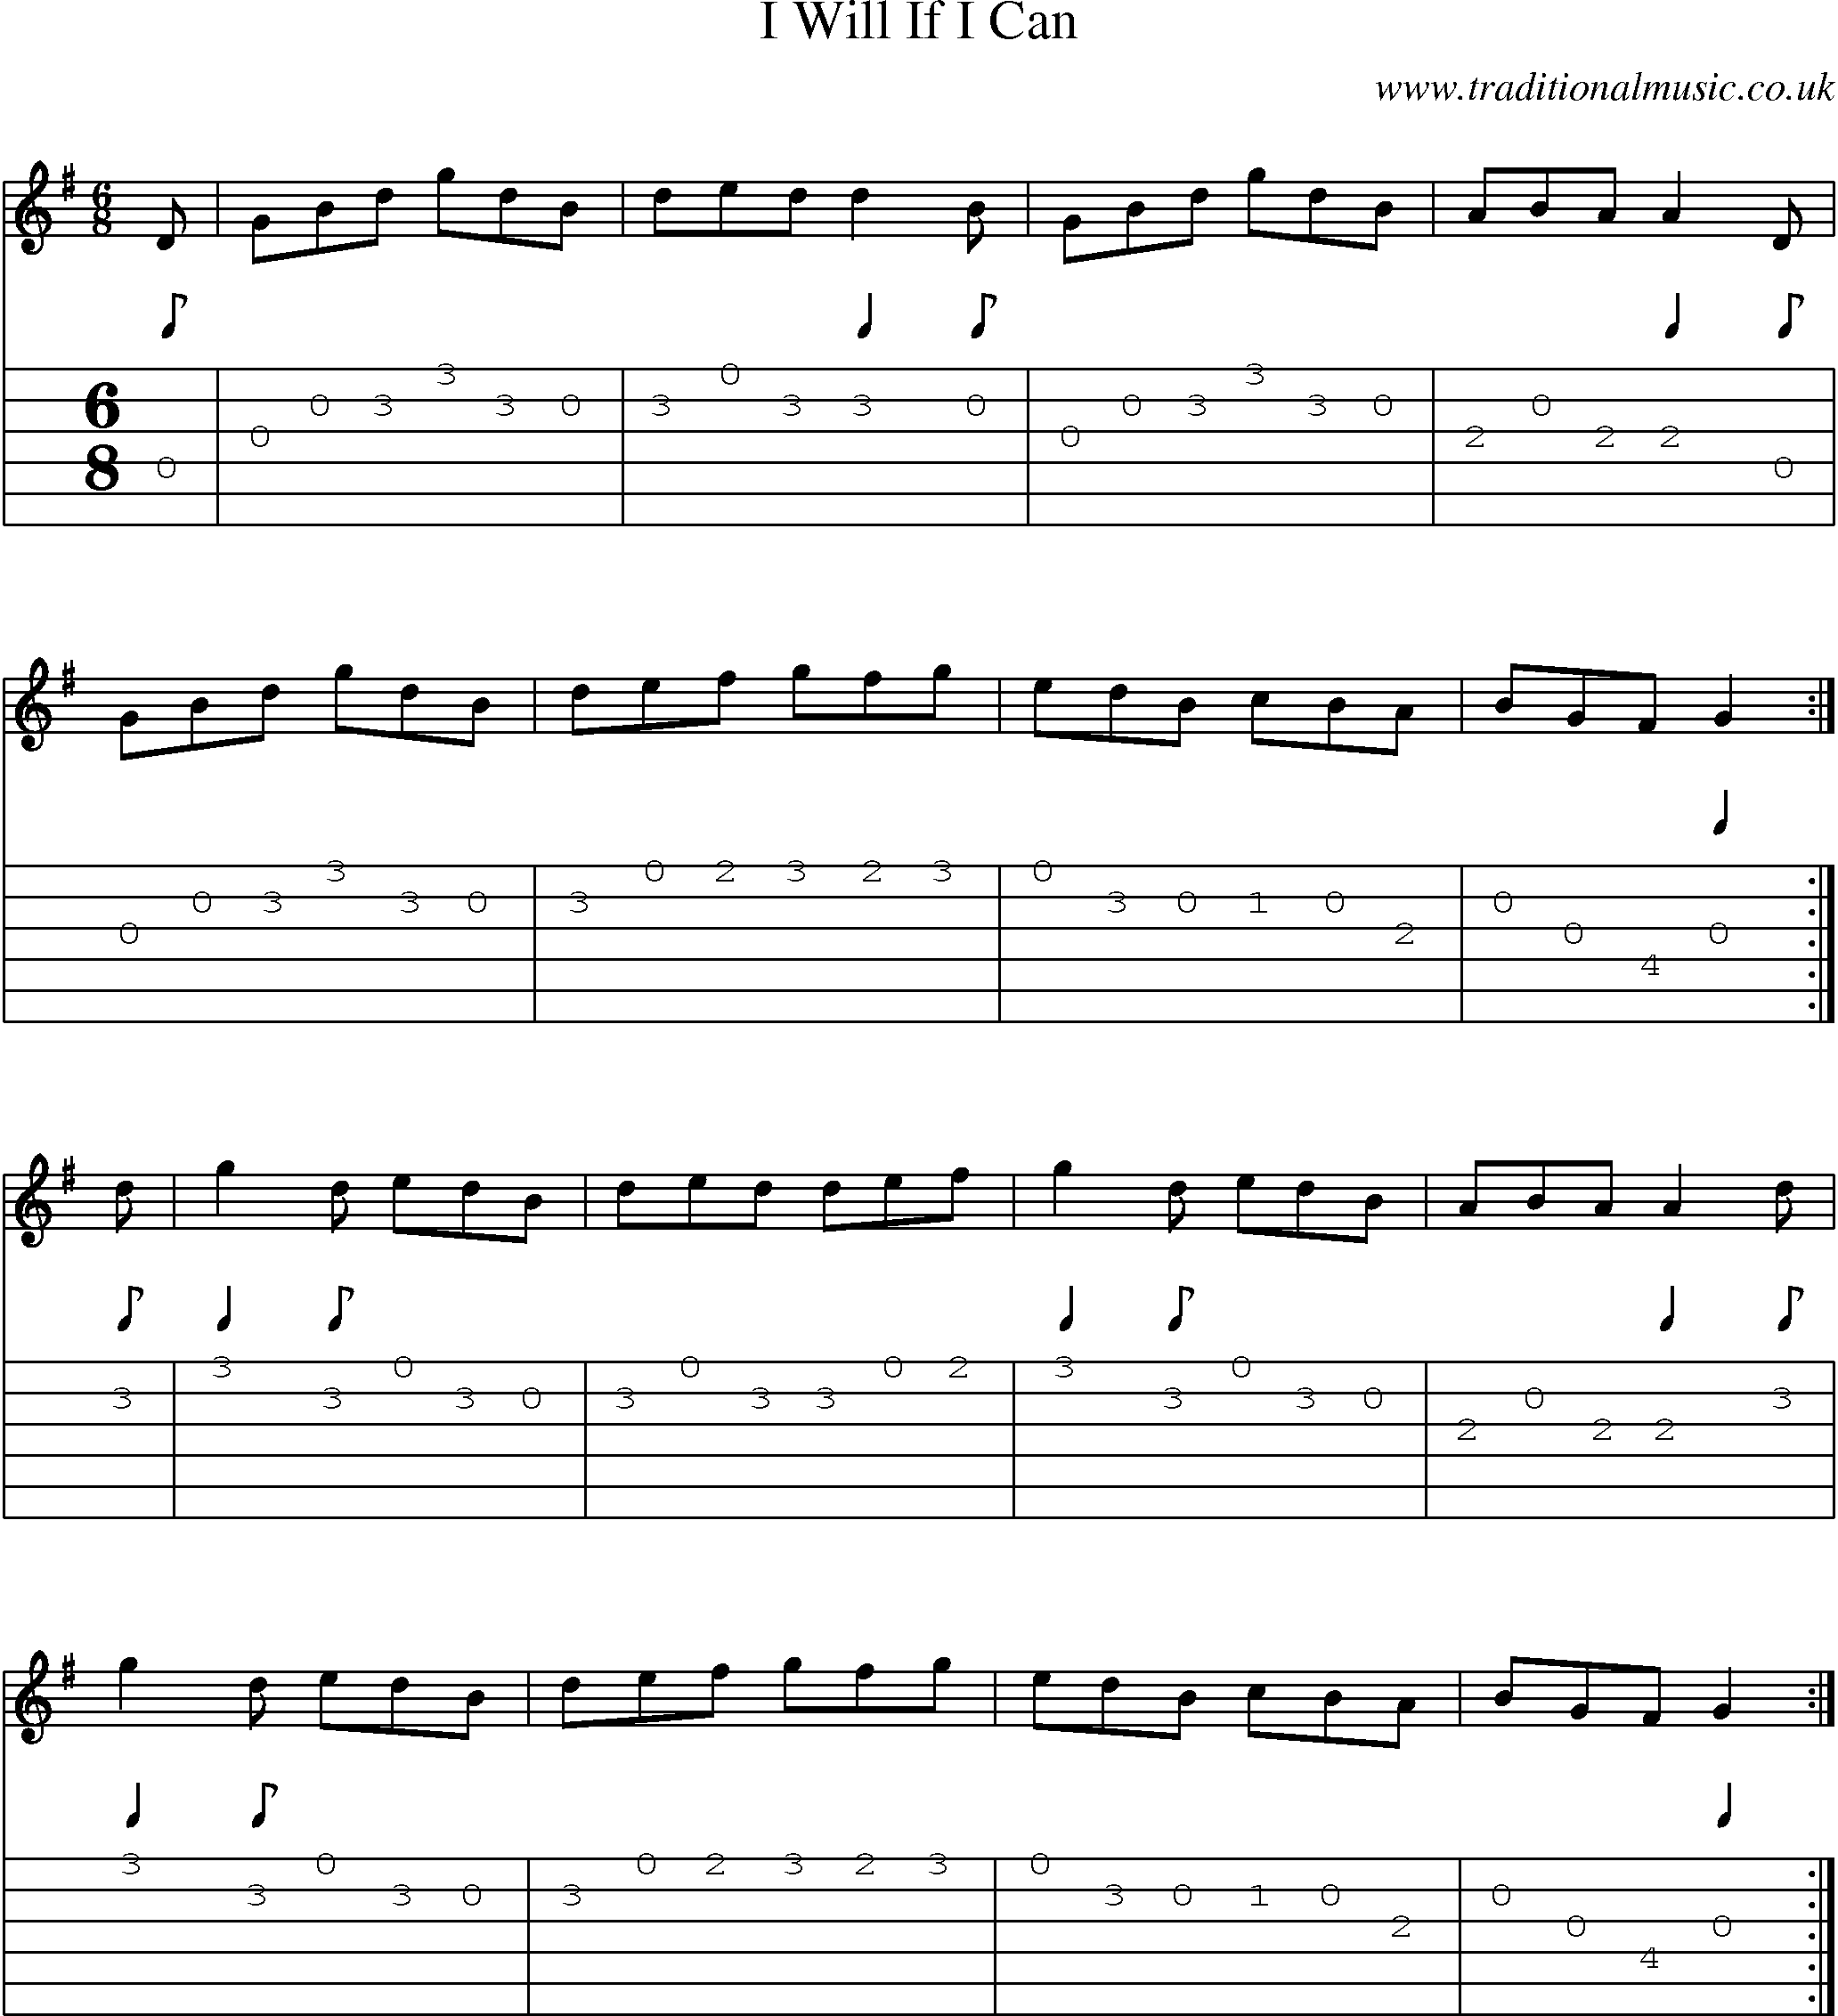 Music Score and Guitar Tabs for I Will If I Can